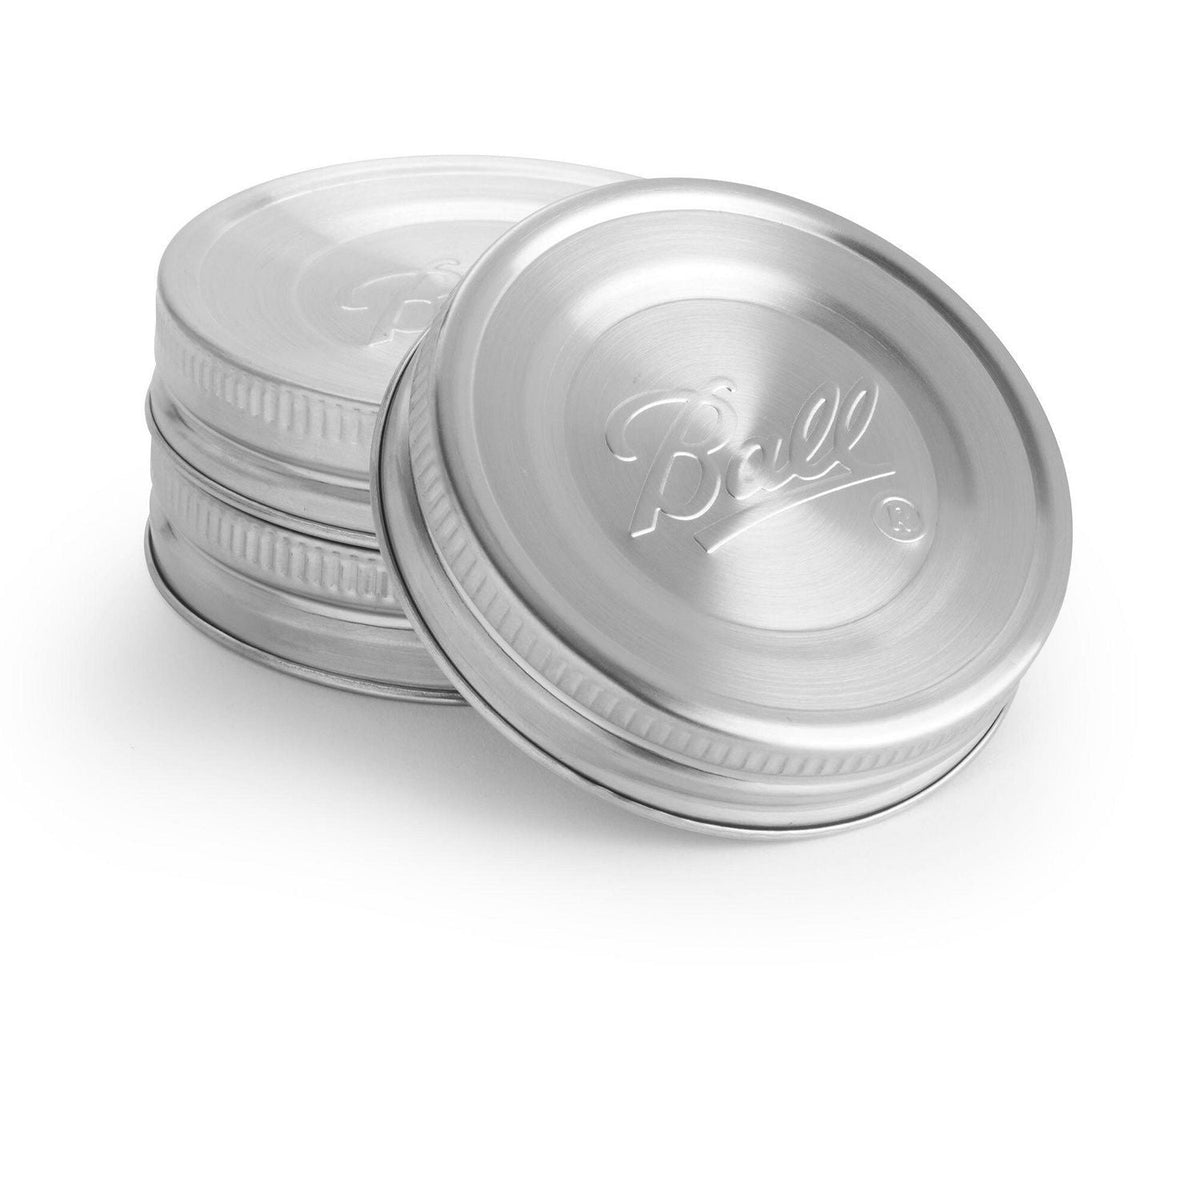 Ball Stainless Steel Lids 3 Pack - Airtight and Stackable